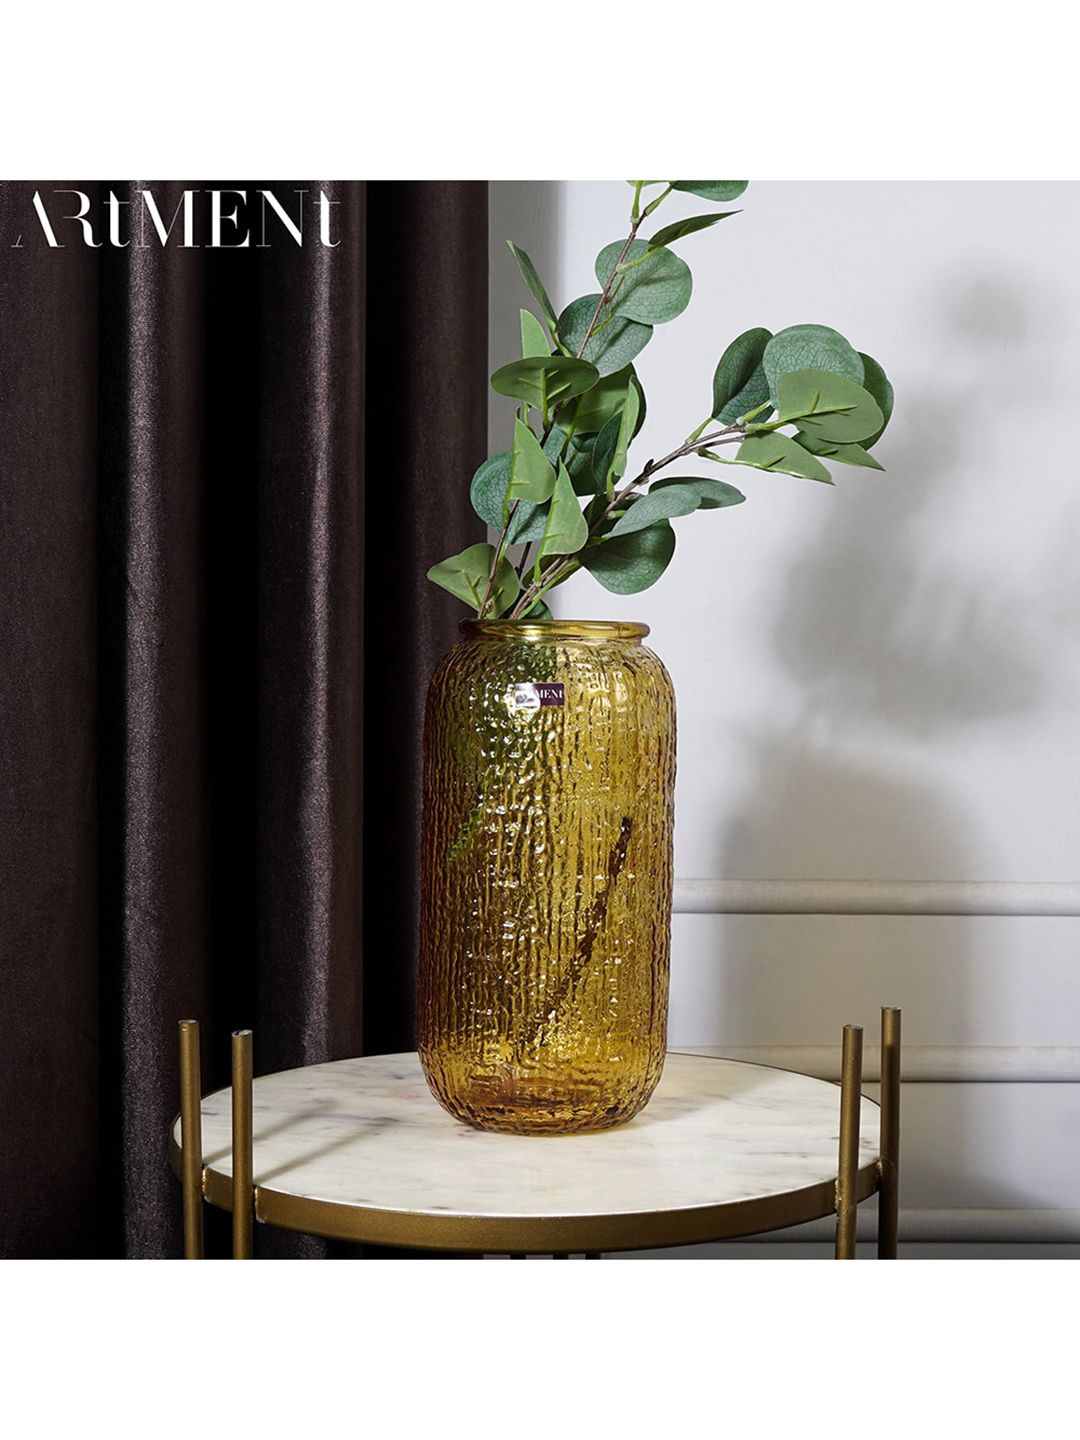 THE ARTMENT Yellow Bohemian Spring of Fantasy Vase Price in India